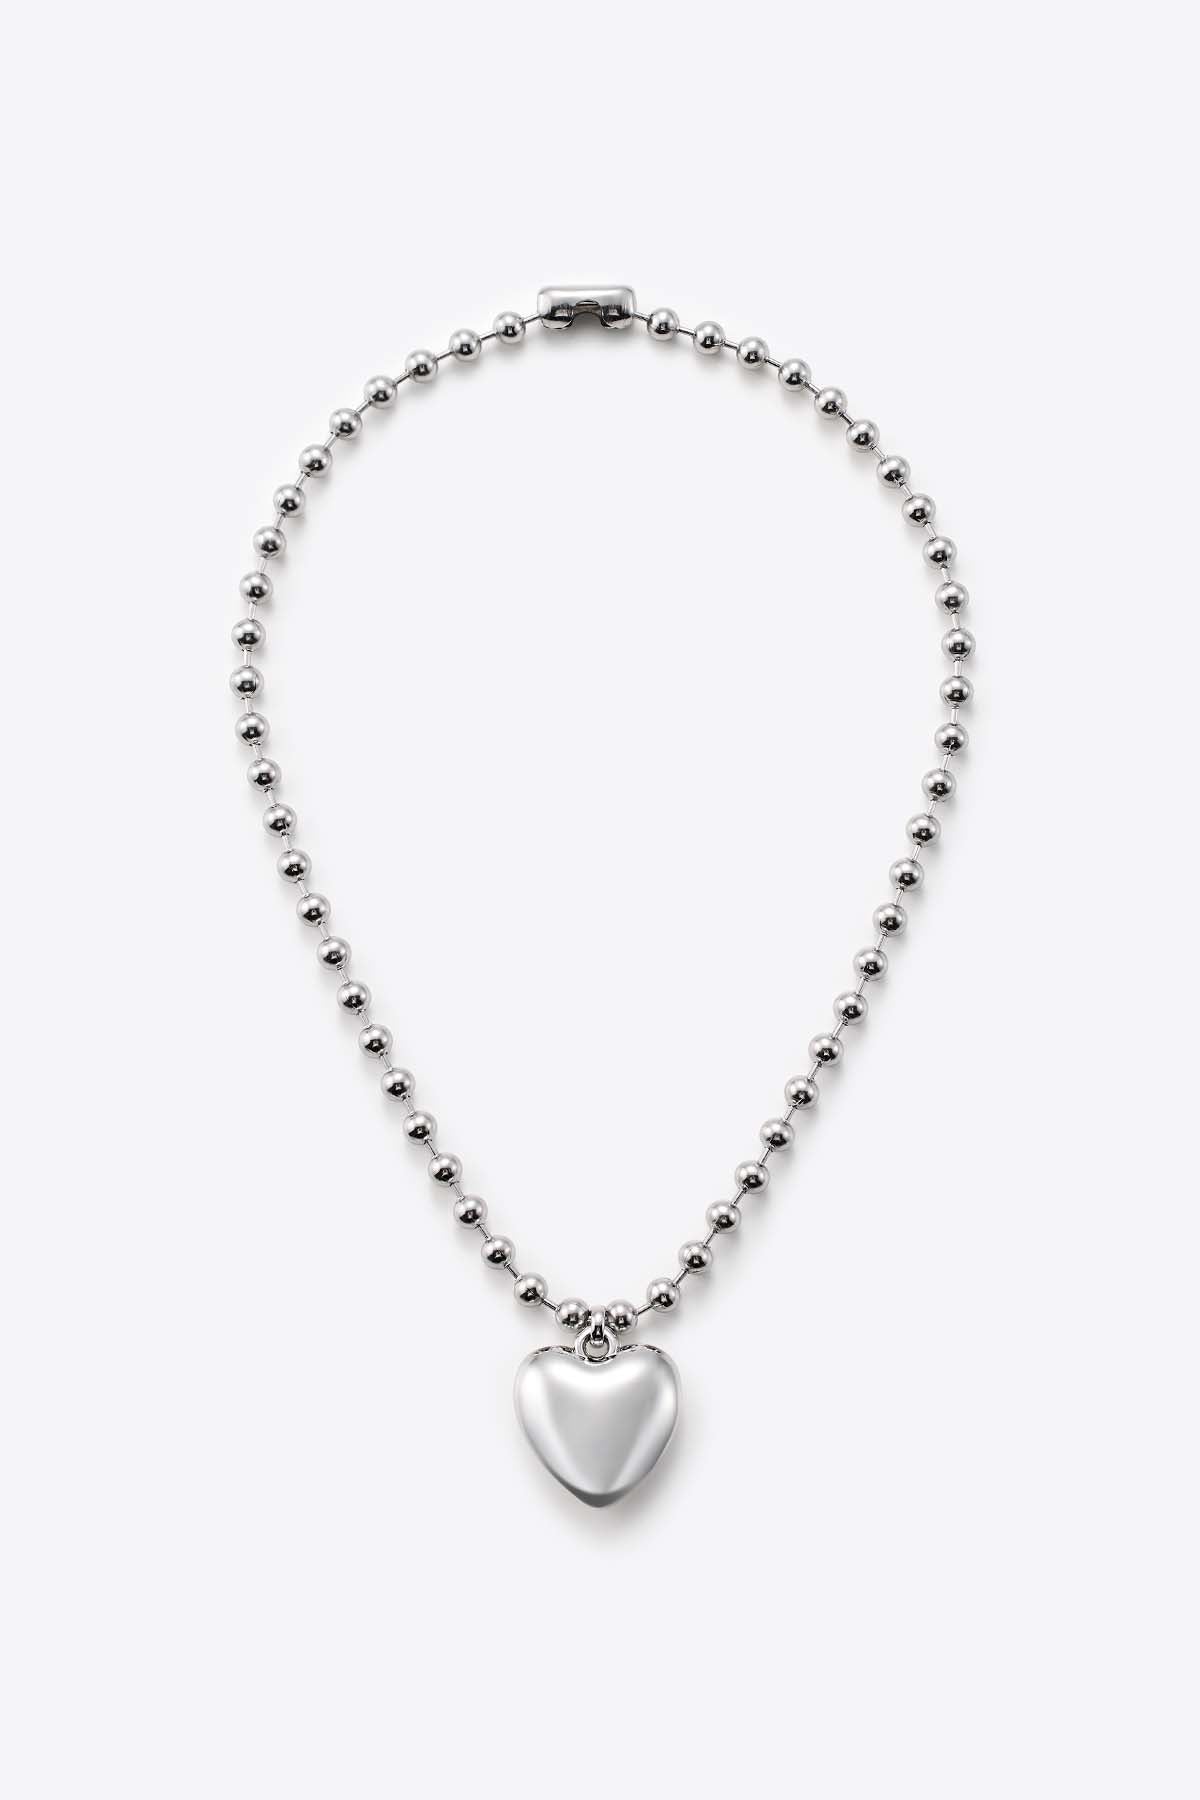 Heart Ball Chain Necklace